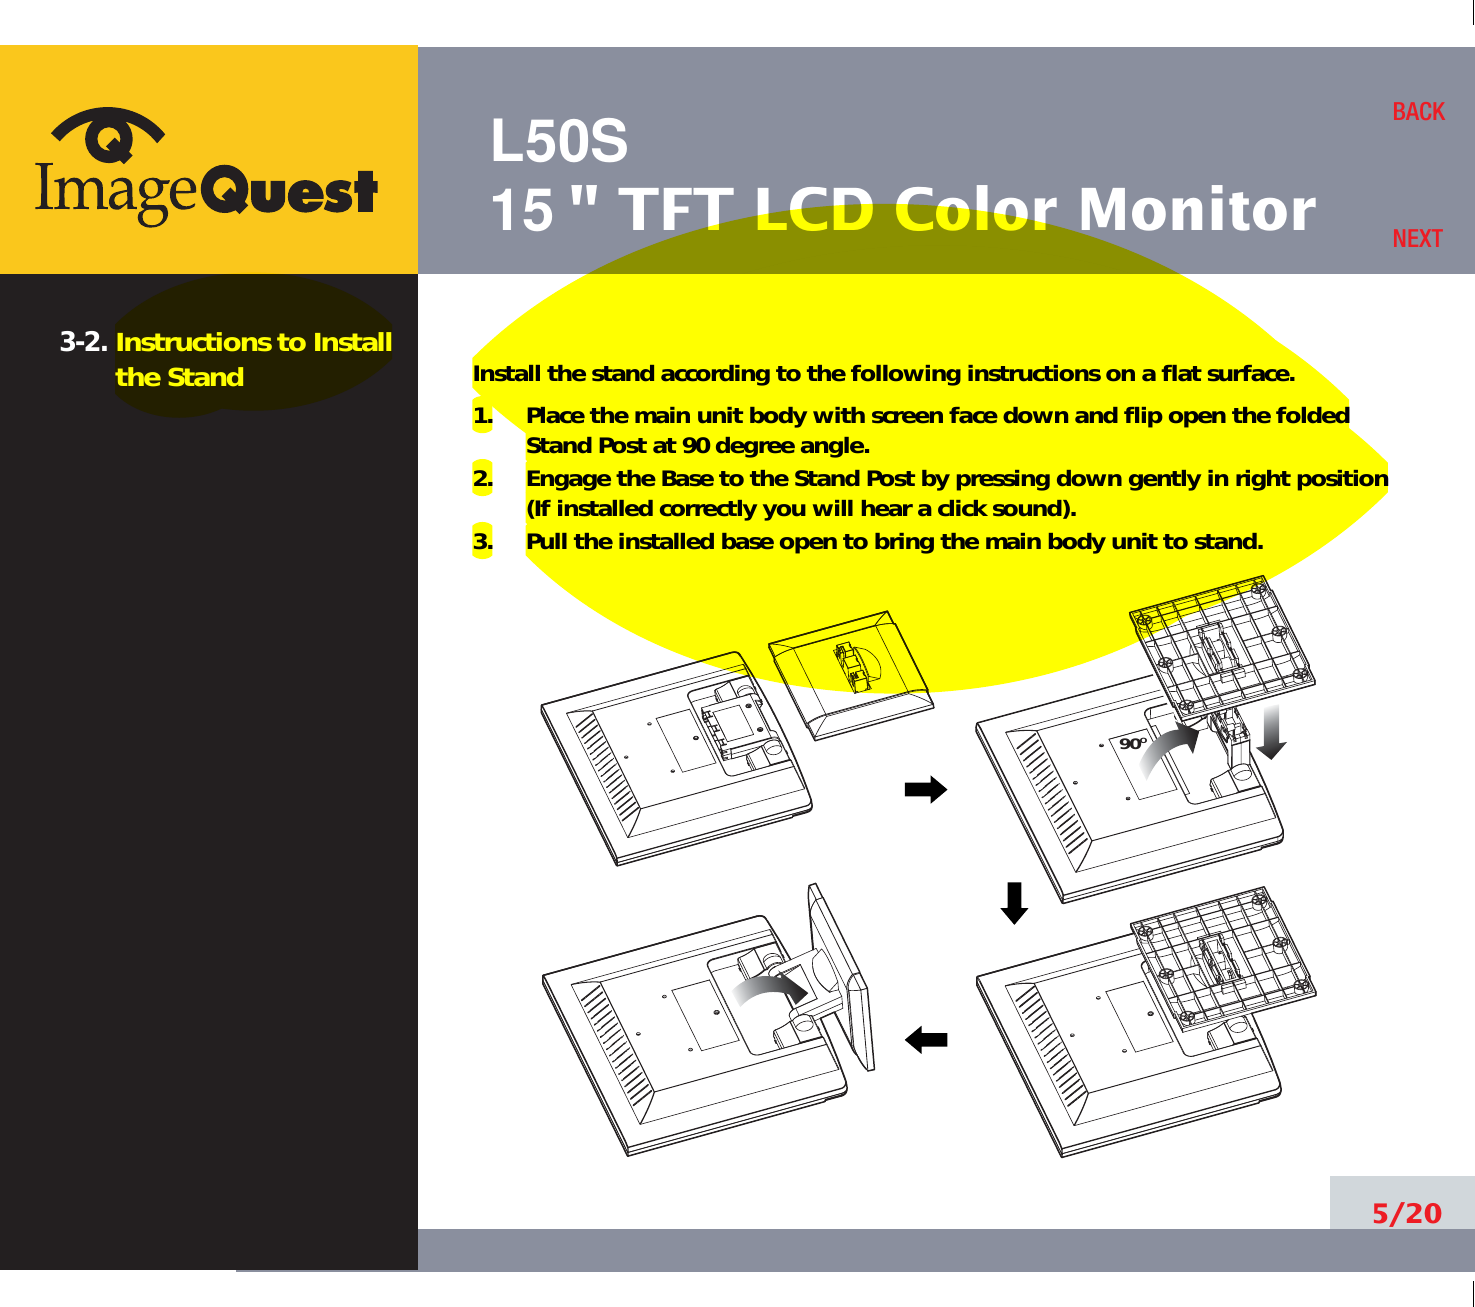 L50S15&quot; TFT LCD Color Monitor3-2. Instructions to Installthe Stand Install the stand according to the following instructions on a flat surface.1.     Place the main unit body with screen face down and flip open the foldedStand Post at 90 degree angle.2.     Engage the Base to the Stand Post by pressing down gently in right position(If installed correctly you will hear a click sound).3.     Pull the installed base open to bring the main body unit to stand.5/20BACKNEXT90O